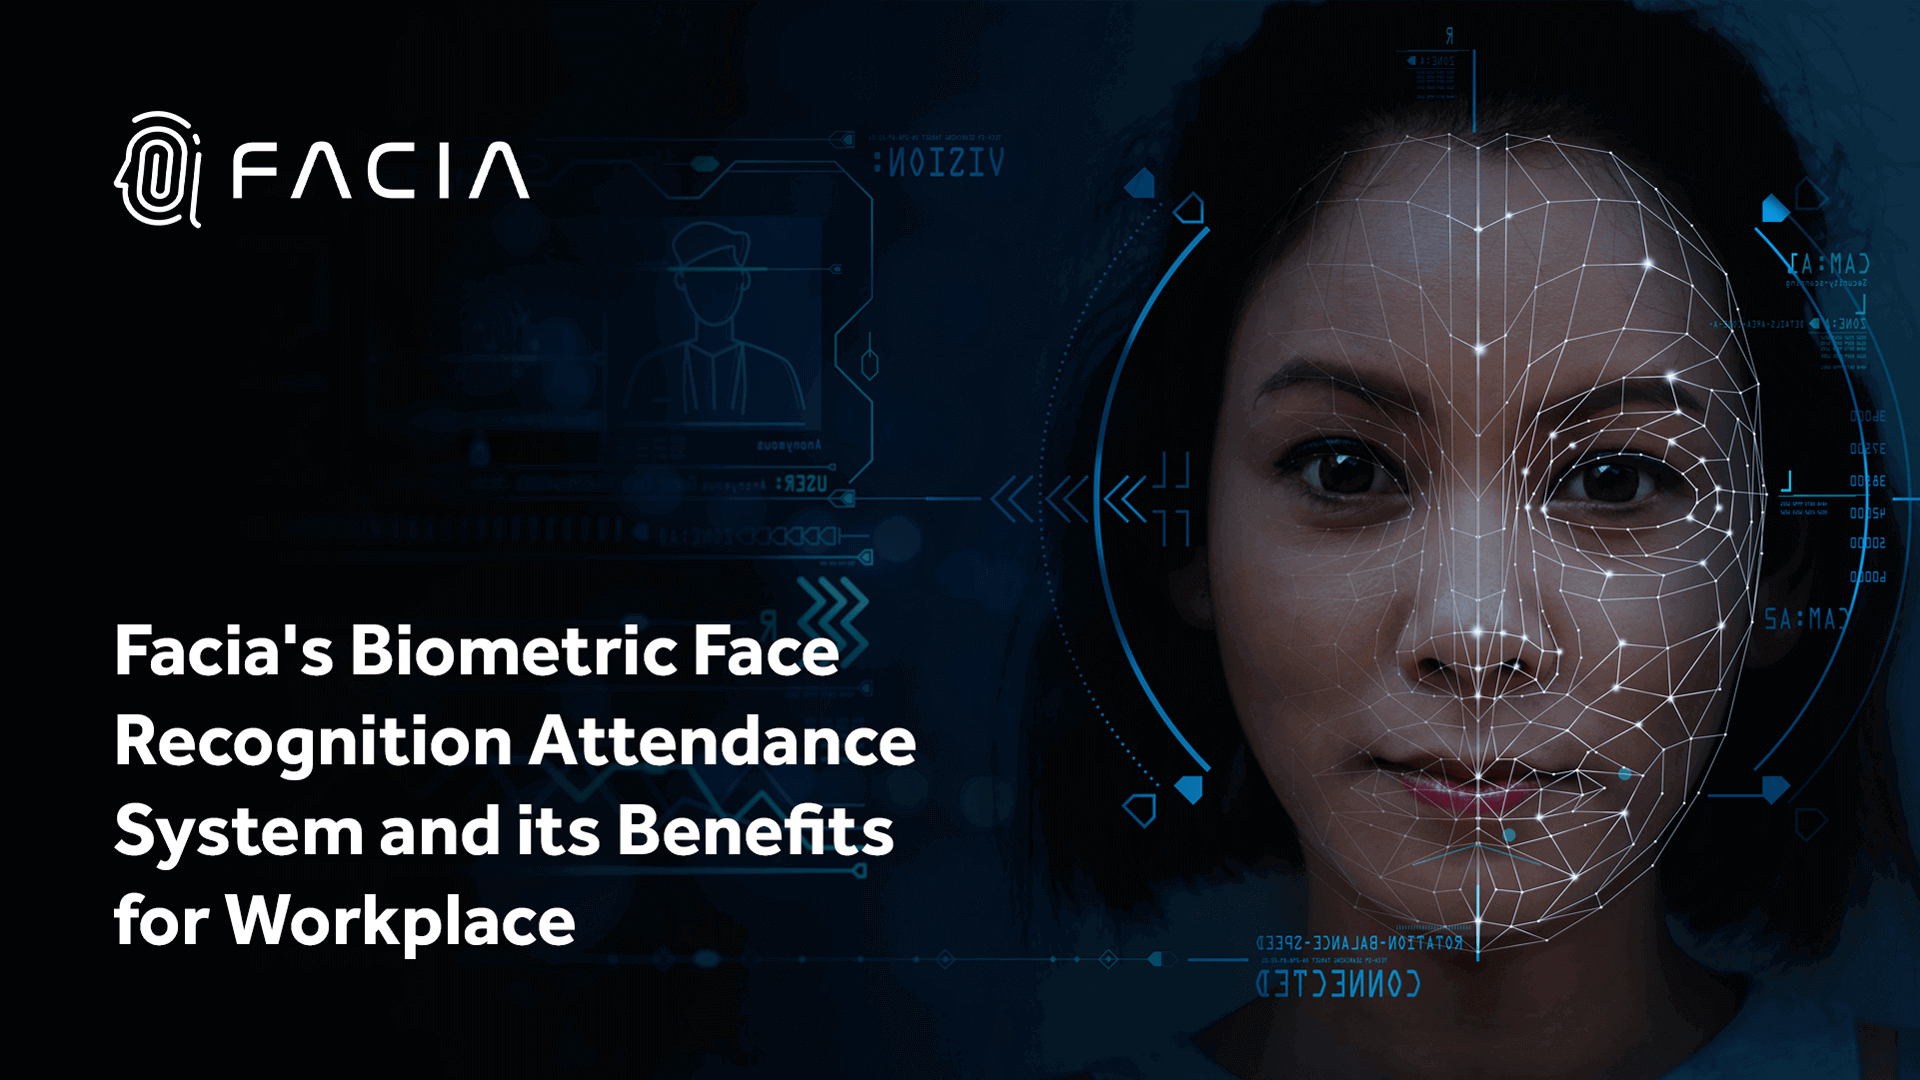 Facia’s Biometric Face Recognition Attendance System and its Benefits for Workplace